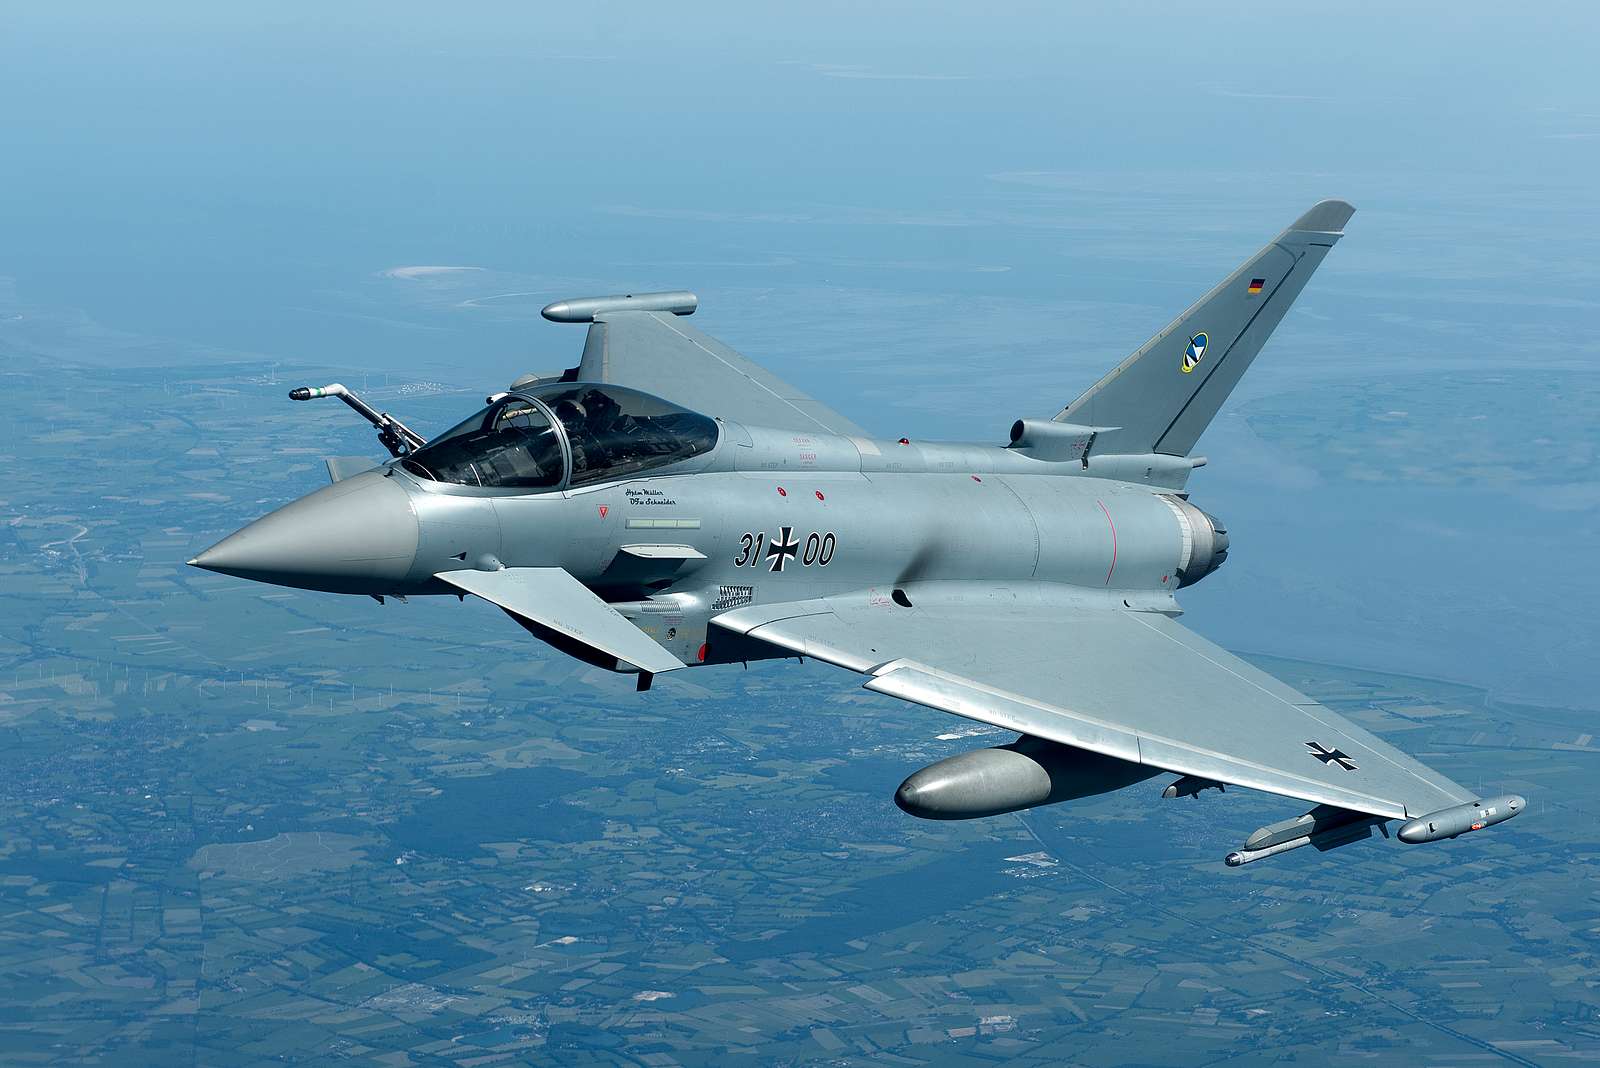 Germany launched two Eurofighter Typhoon aircraft to intercept Russian MiG-31, Su-27 and Il-62M fighters